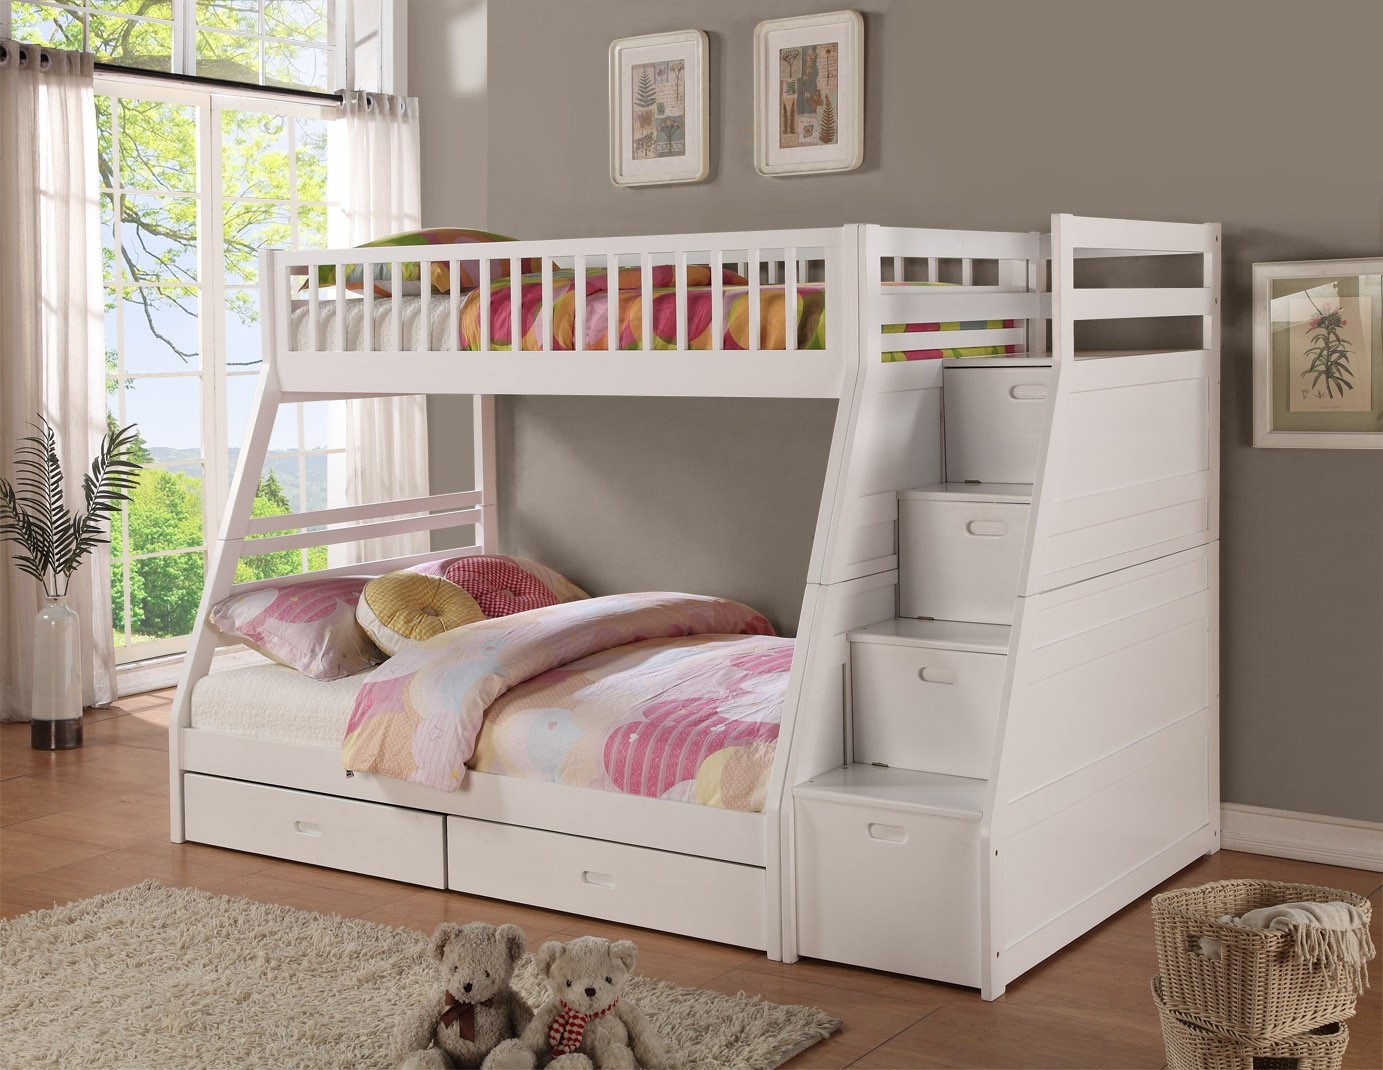 81" X 59" X 65" White Manufactured Wood and Solid Wood Twin or Full Staircase Bunk Bed with Storage